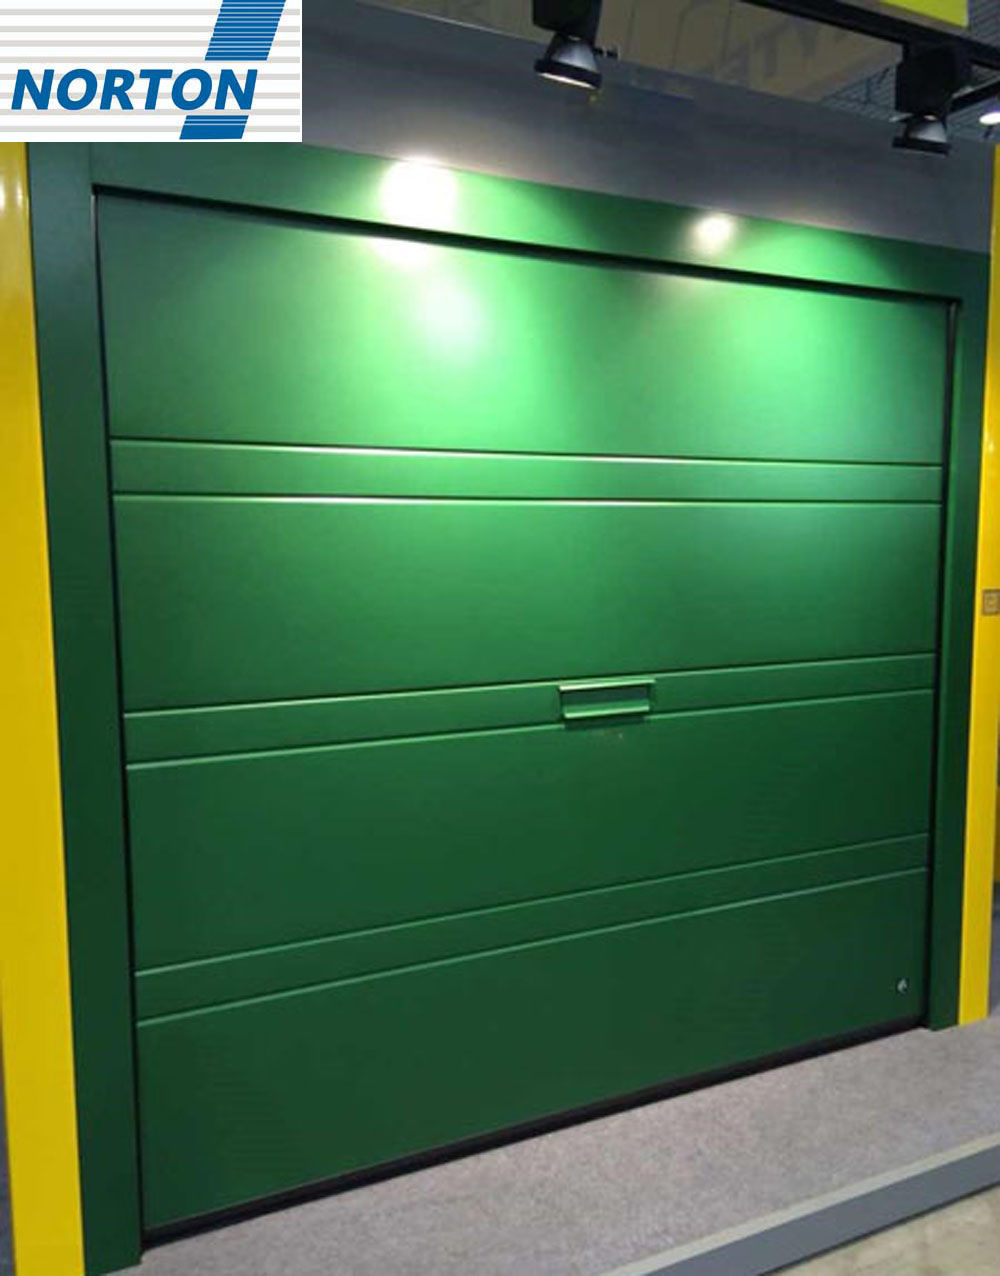 Green environmentally friendly and fashionable electric garage door